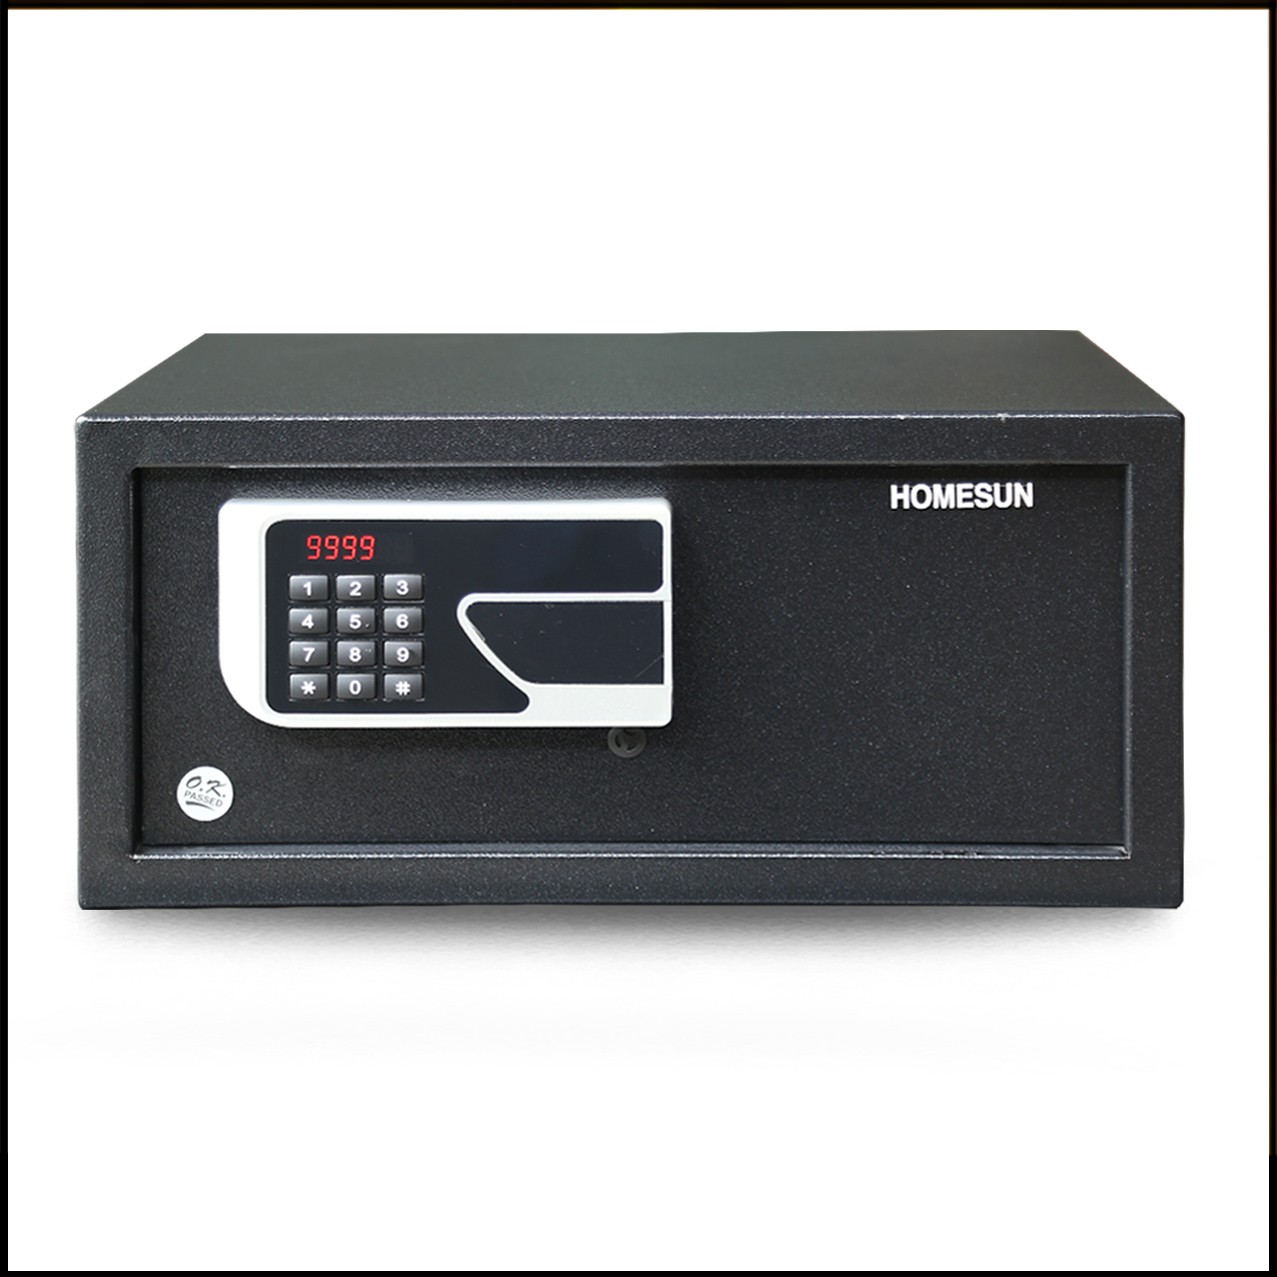 Used Hotel Safes Wholesale Suppliers